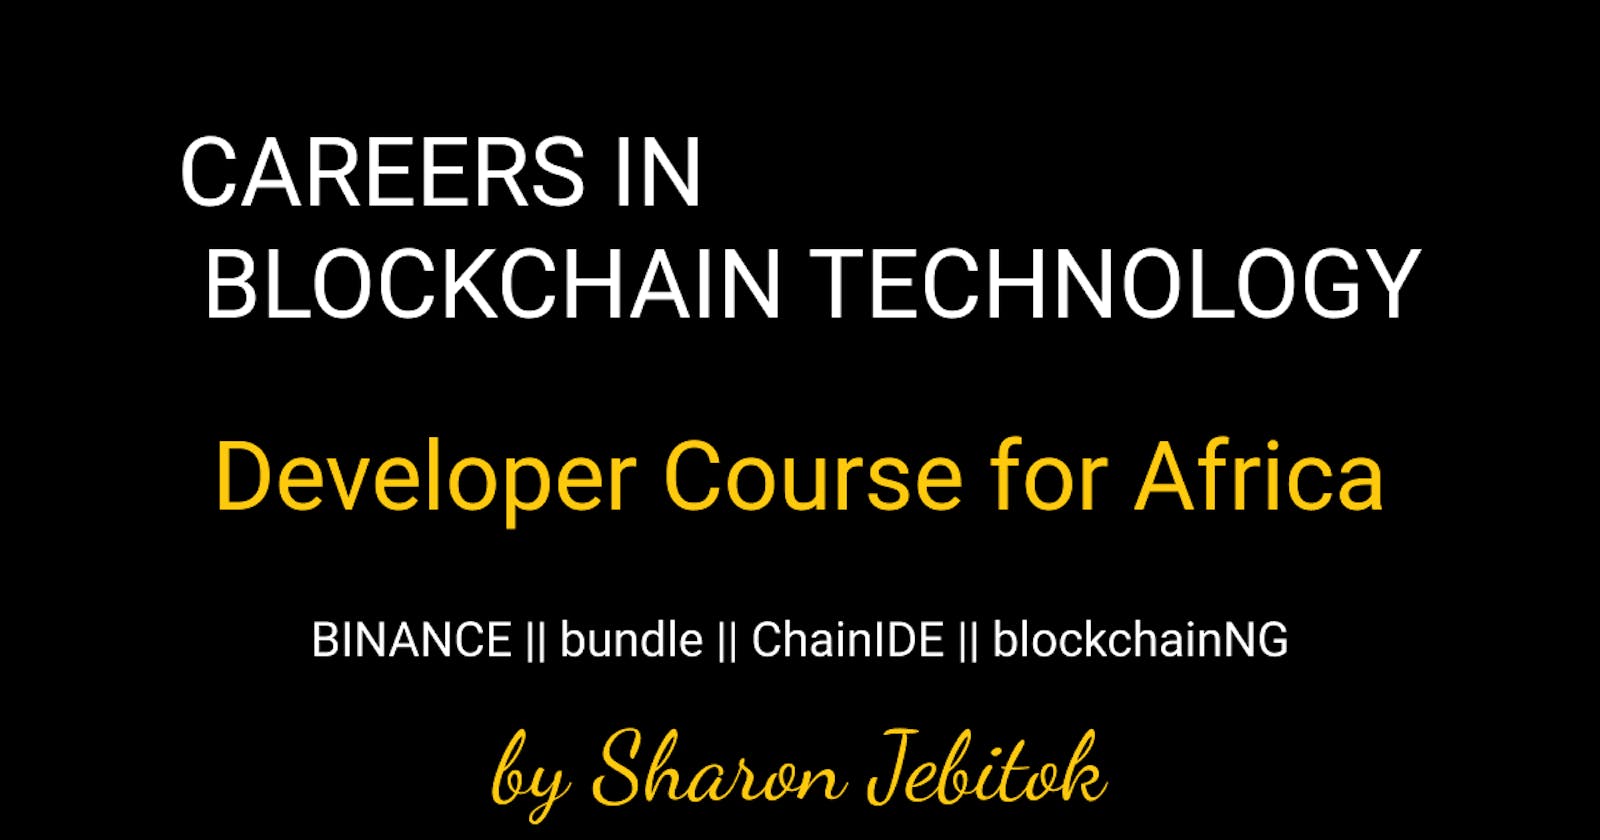 Careers in Blockchain Technology: Binance 8 week training for African Developers